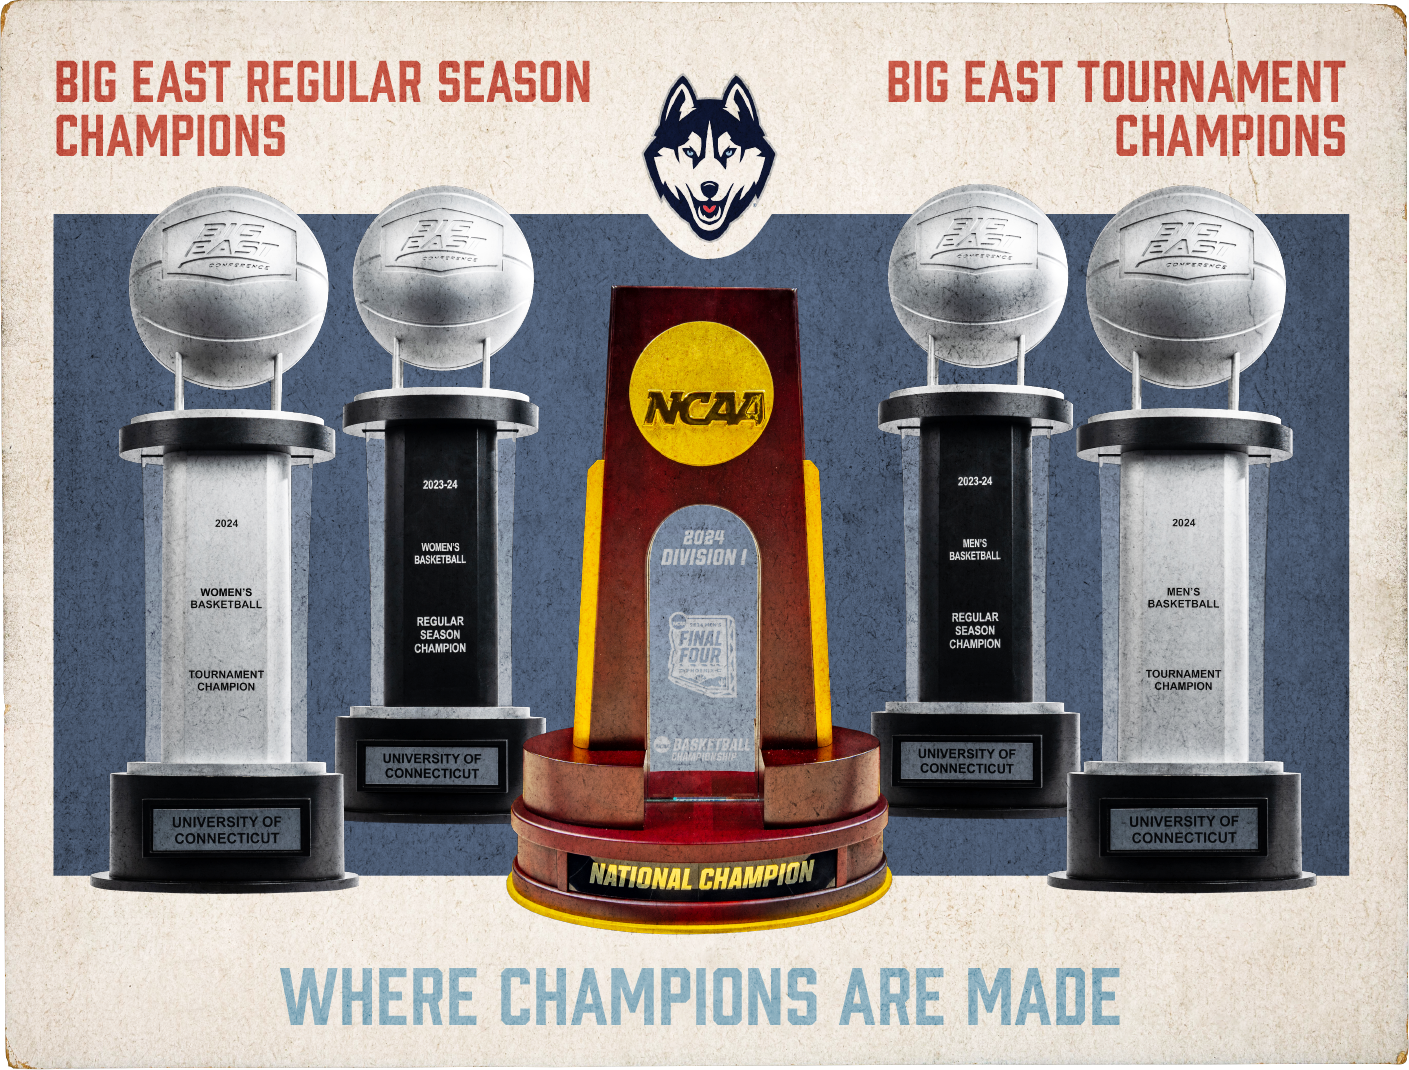 Vintage-style trading card with 5 trophies silhouetted against a blue background: the 2024 Division I men’s basketball national championship trophy in the center and the 2023-2024 men’s and women’s basketball regular season trophies and the 2024 men’s and women’s basketball Big East Tournament champion trophies next to it. The card says “Big East Reglar Season Champions” and “Big East Tournament Champions” on top with UConn’s Husky dog logo in the center and “Where Champions Are Made” at the bottom.